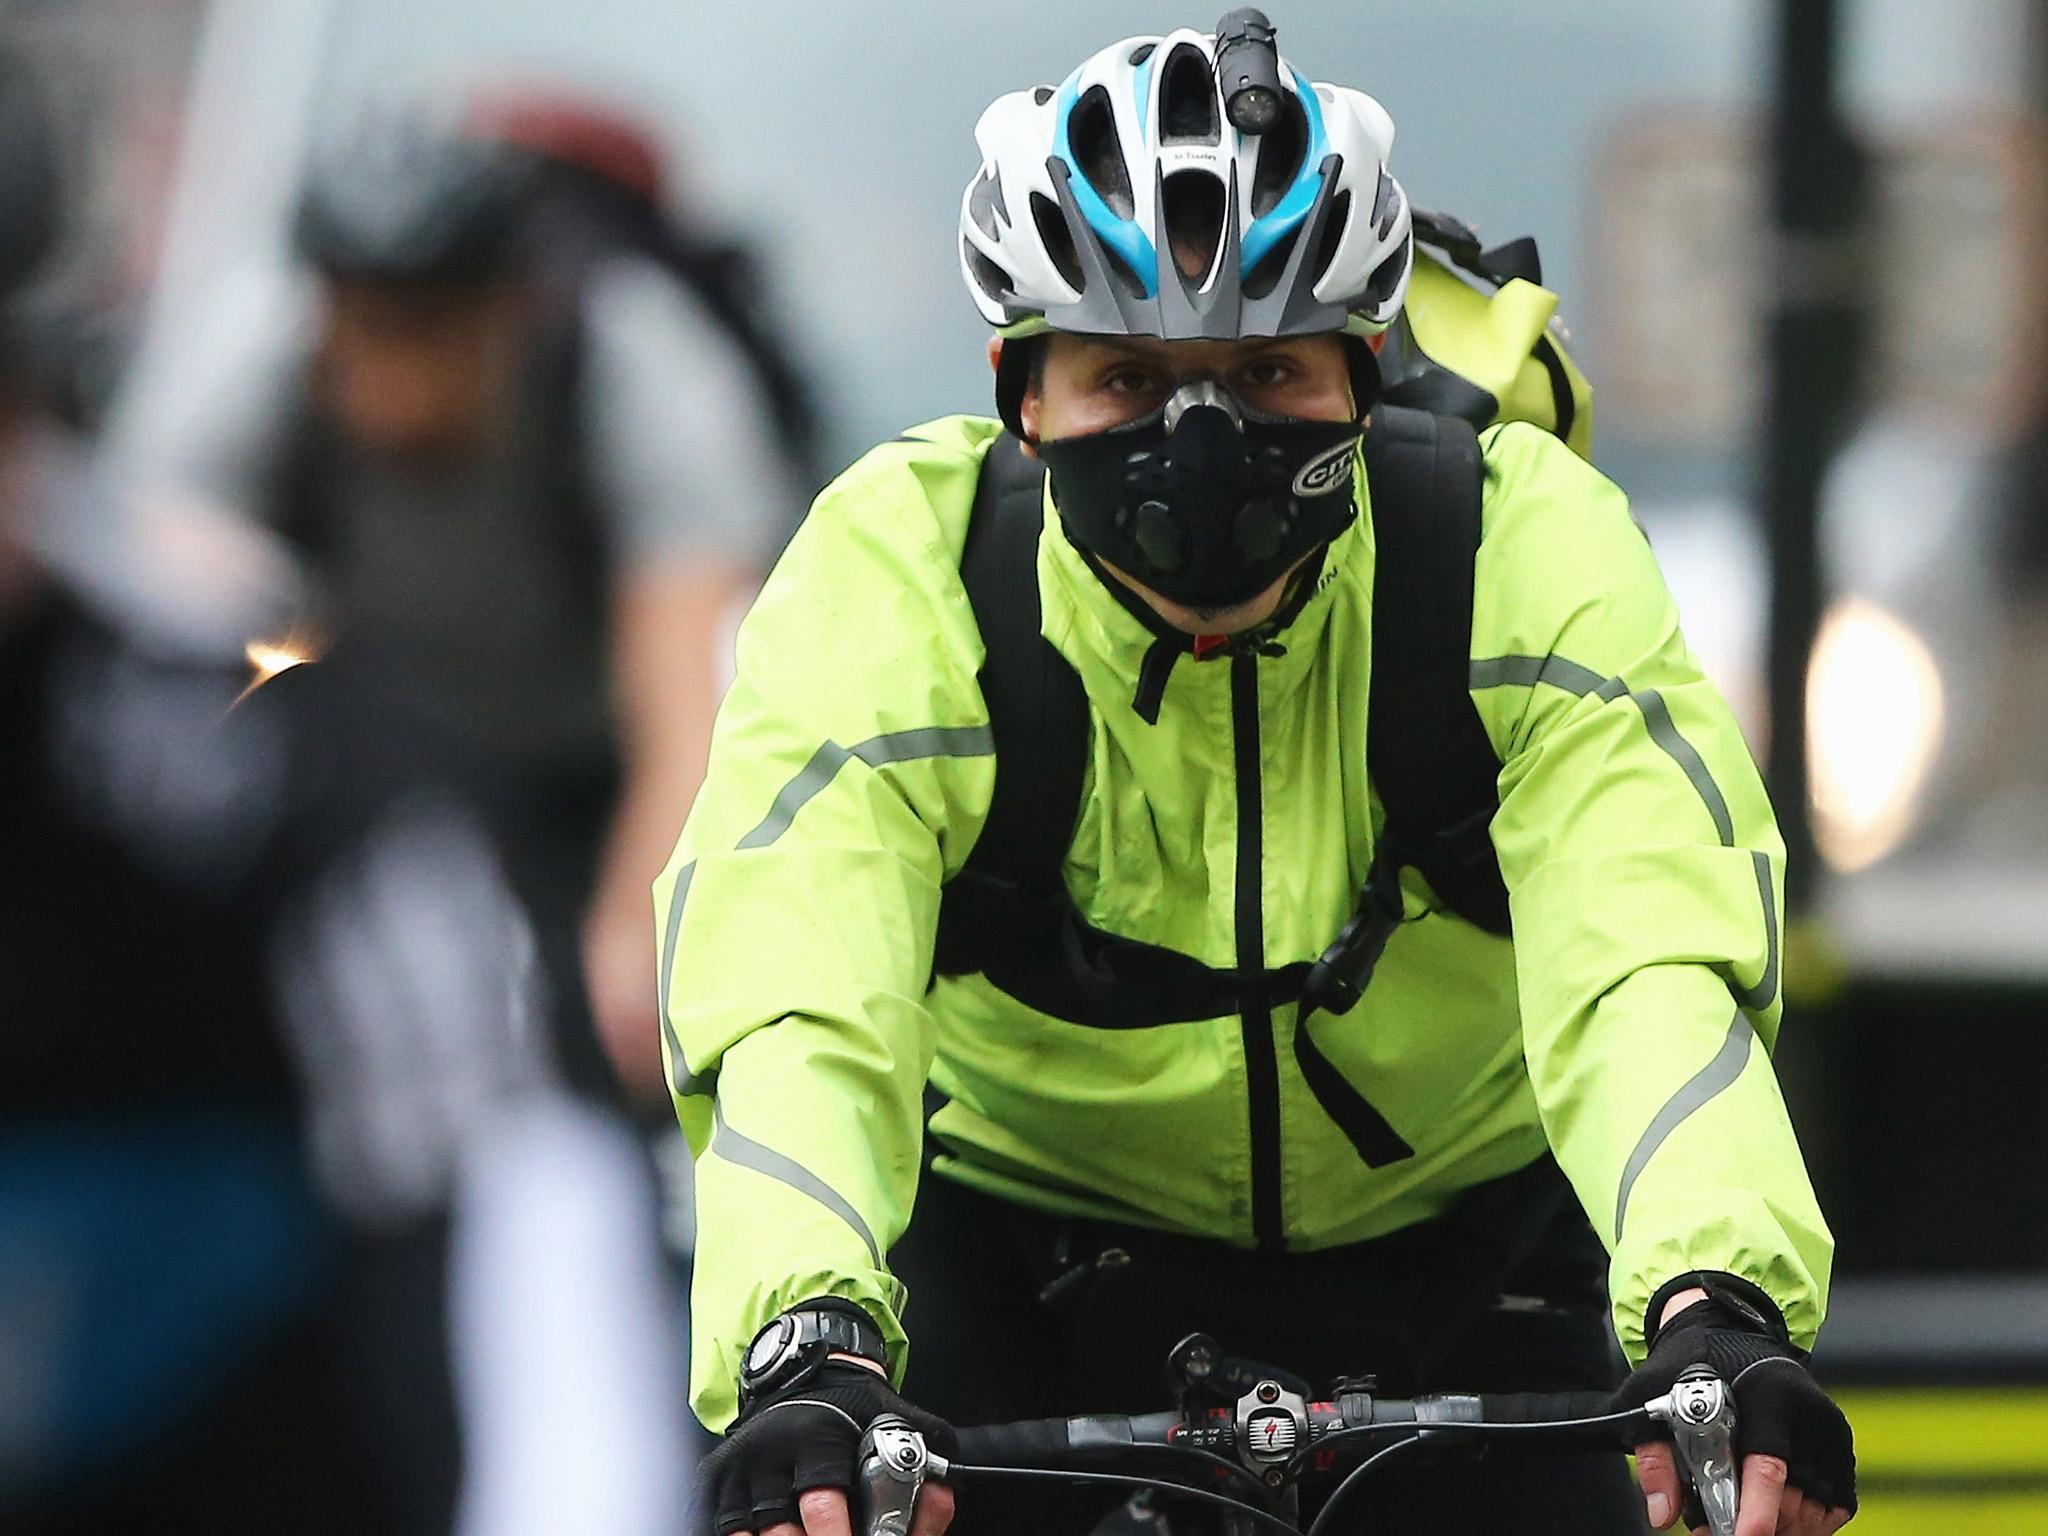 A London cyclist wears a face mask to avoid inhaling pollution